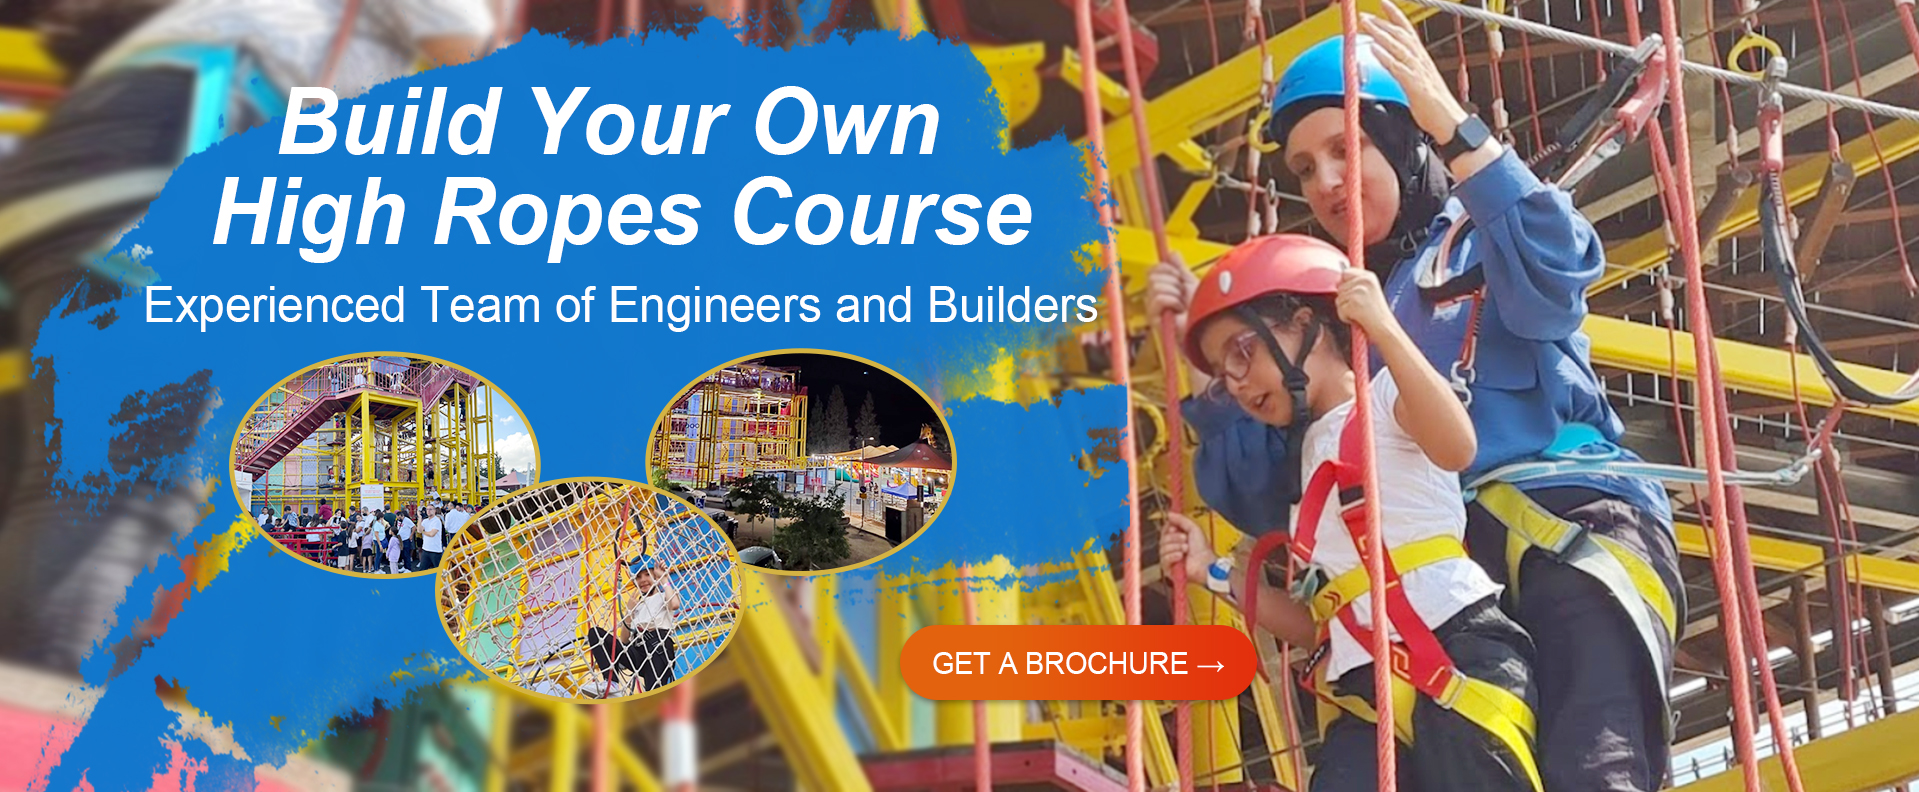 ropes course, adventure ropes course, rope park, adventure courses, zipline course, climbing wall, challenge tower